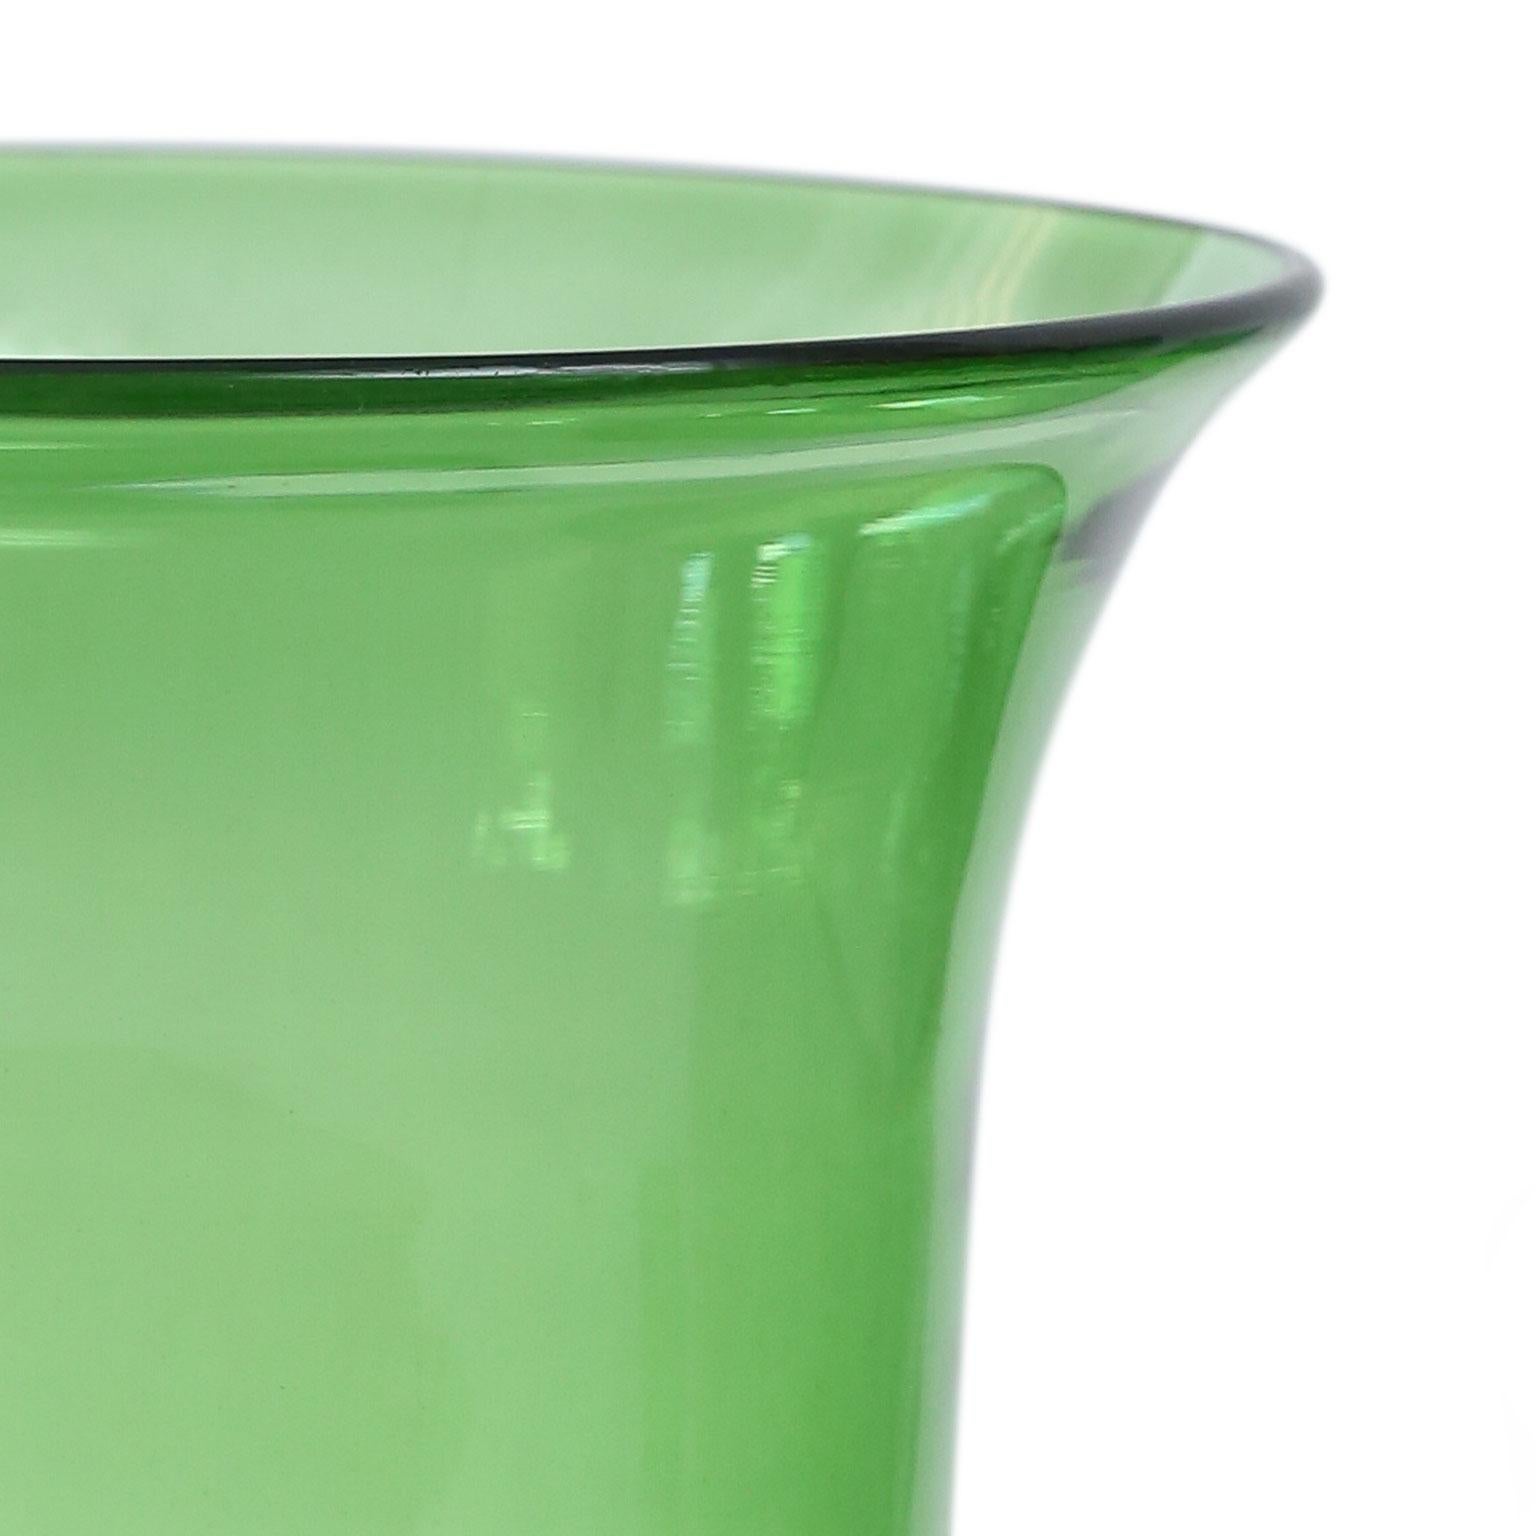 Italian green glass vase with flared liap, by Empoli, circa 1960.